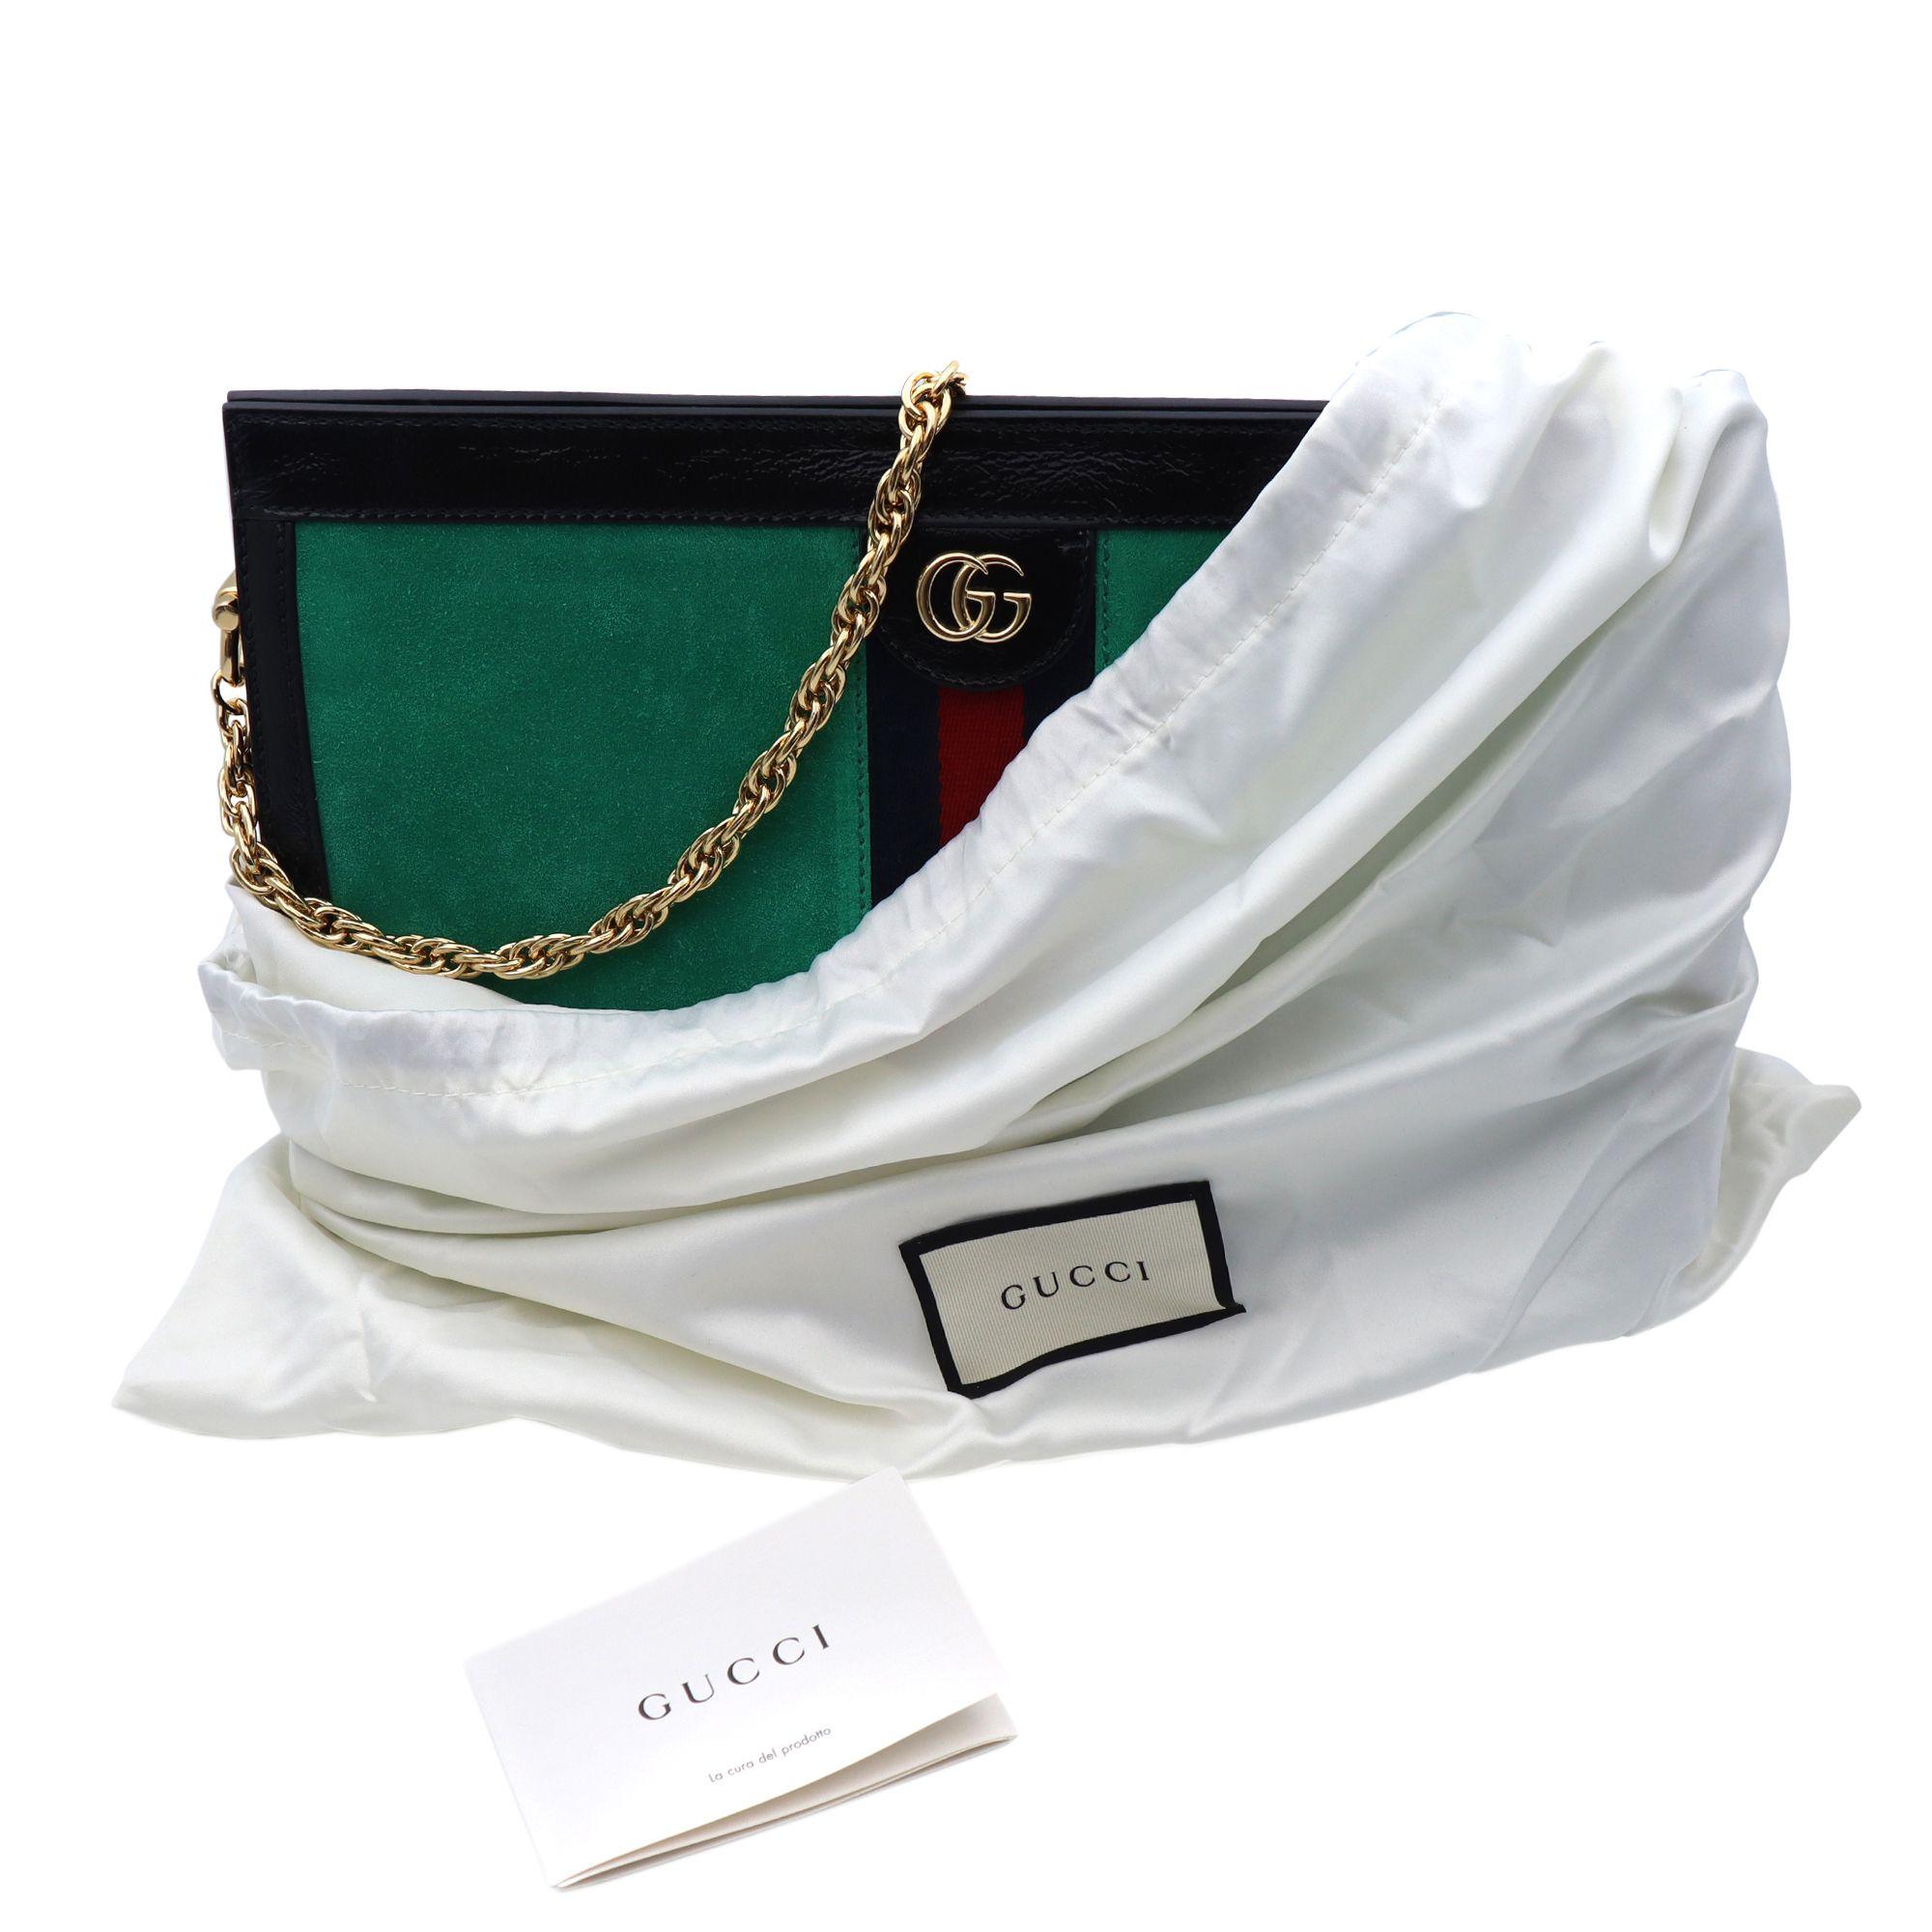 Gucci Ophidia Chain Green Suede Shoulder Bag Size Medium 503876  4